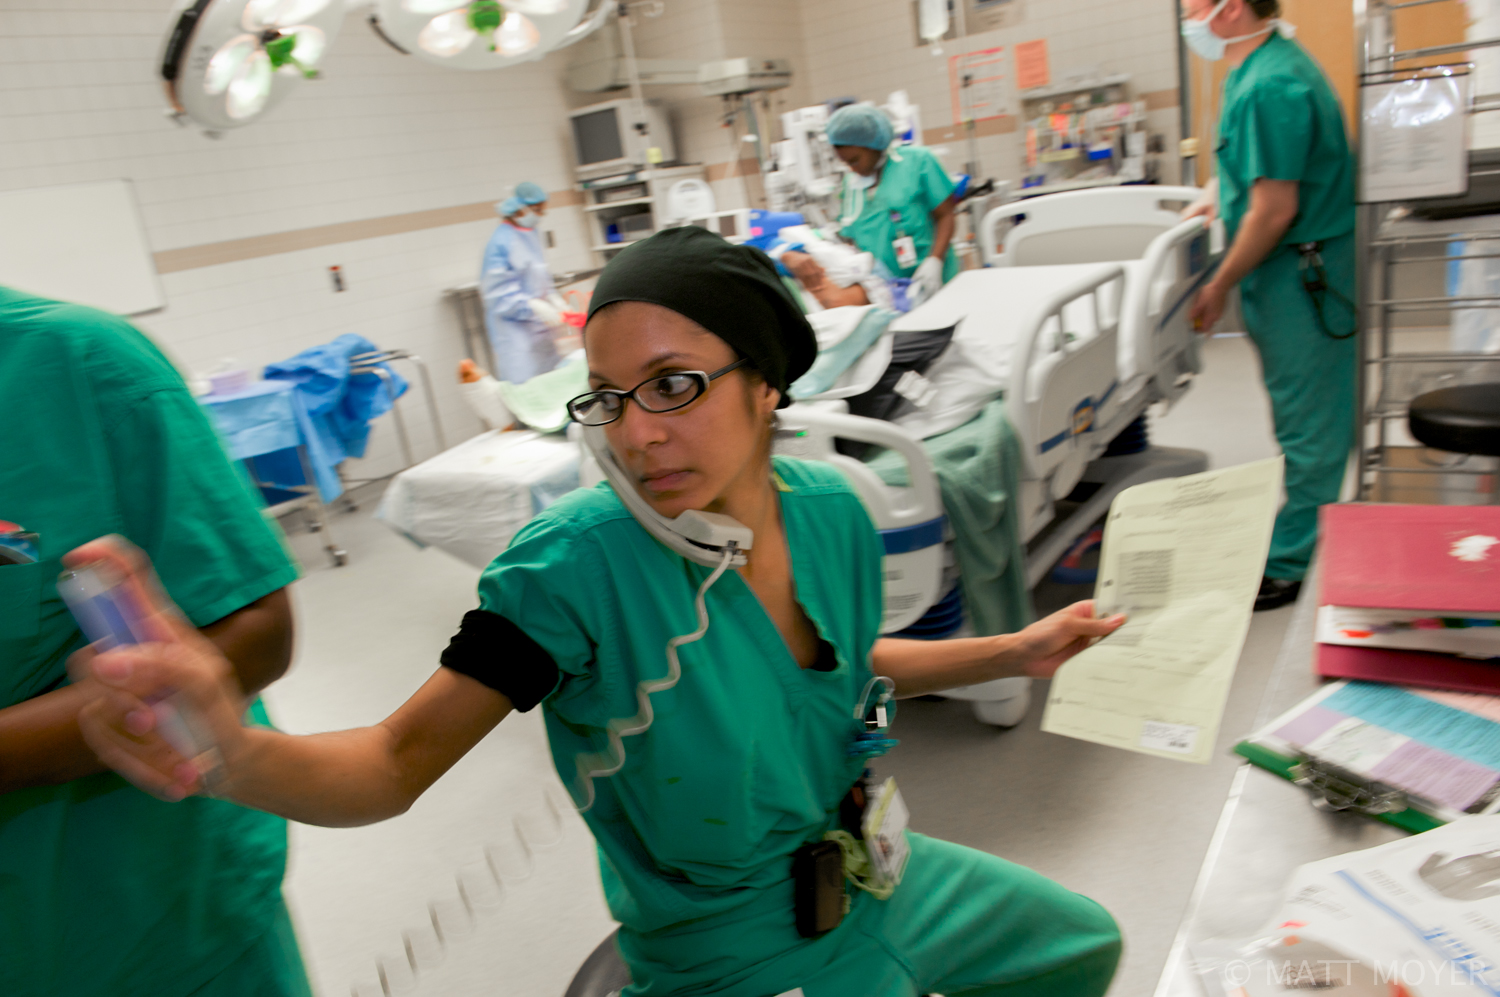  Dr. Carla Haack, a twenty five-year-old surgical resident, multi tasks after completing a surgery at Grady Memorial Hospital. 